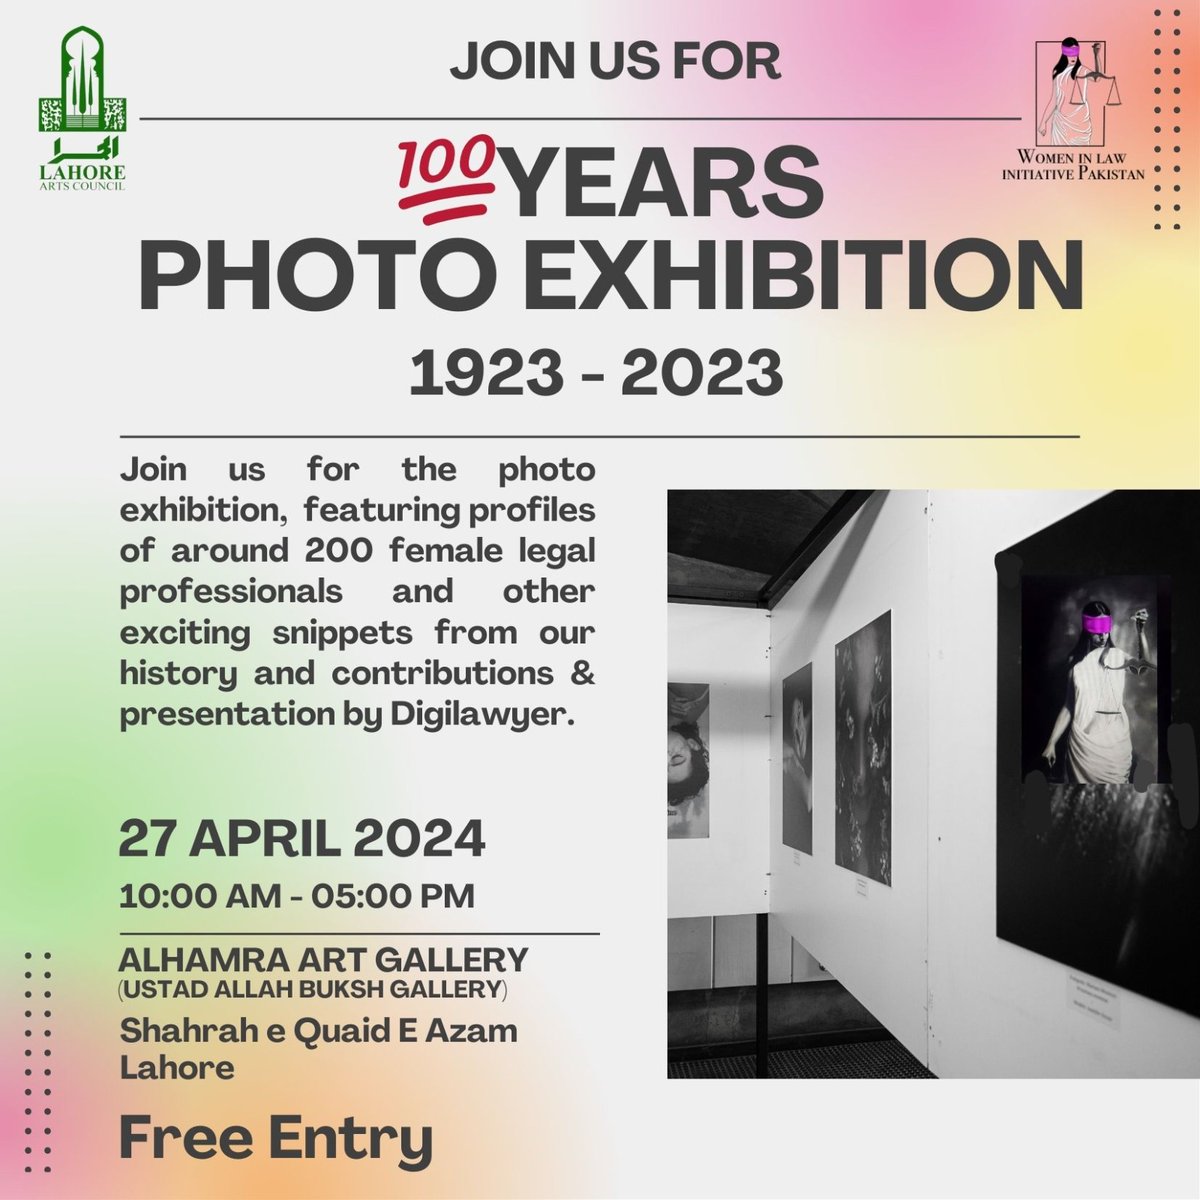 Today is the last opportunity to attend the historic photo exhibition marking 100 years of women's right to practice law. Don't miss this opportunity of seeing history & the struggles come alive! See you at Alhamra Mall Road Lahore any time b/w 10 am to 5 pm!

#VisibilityMatters